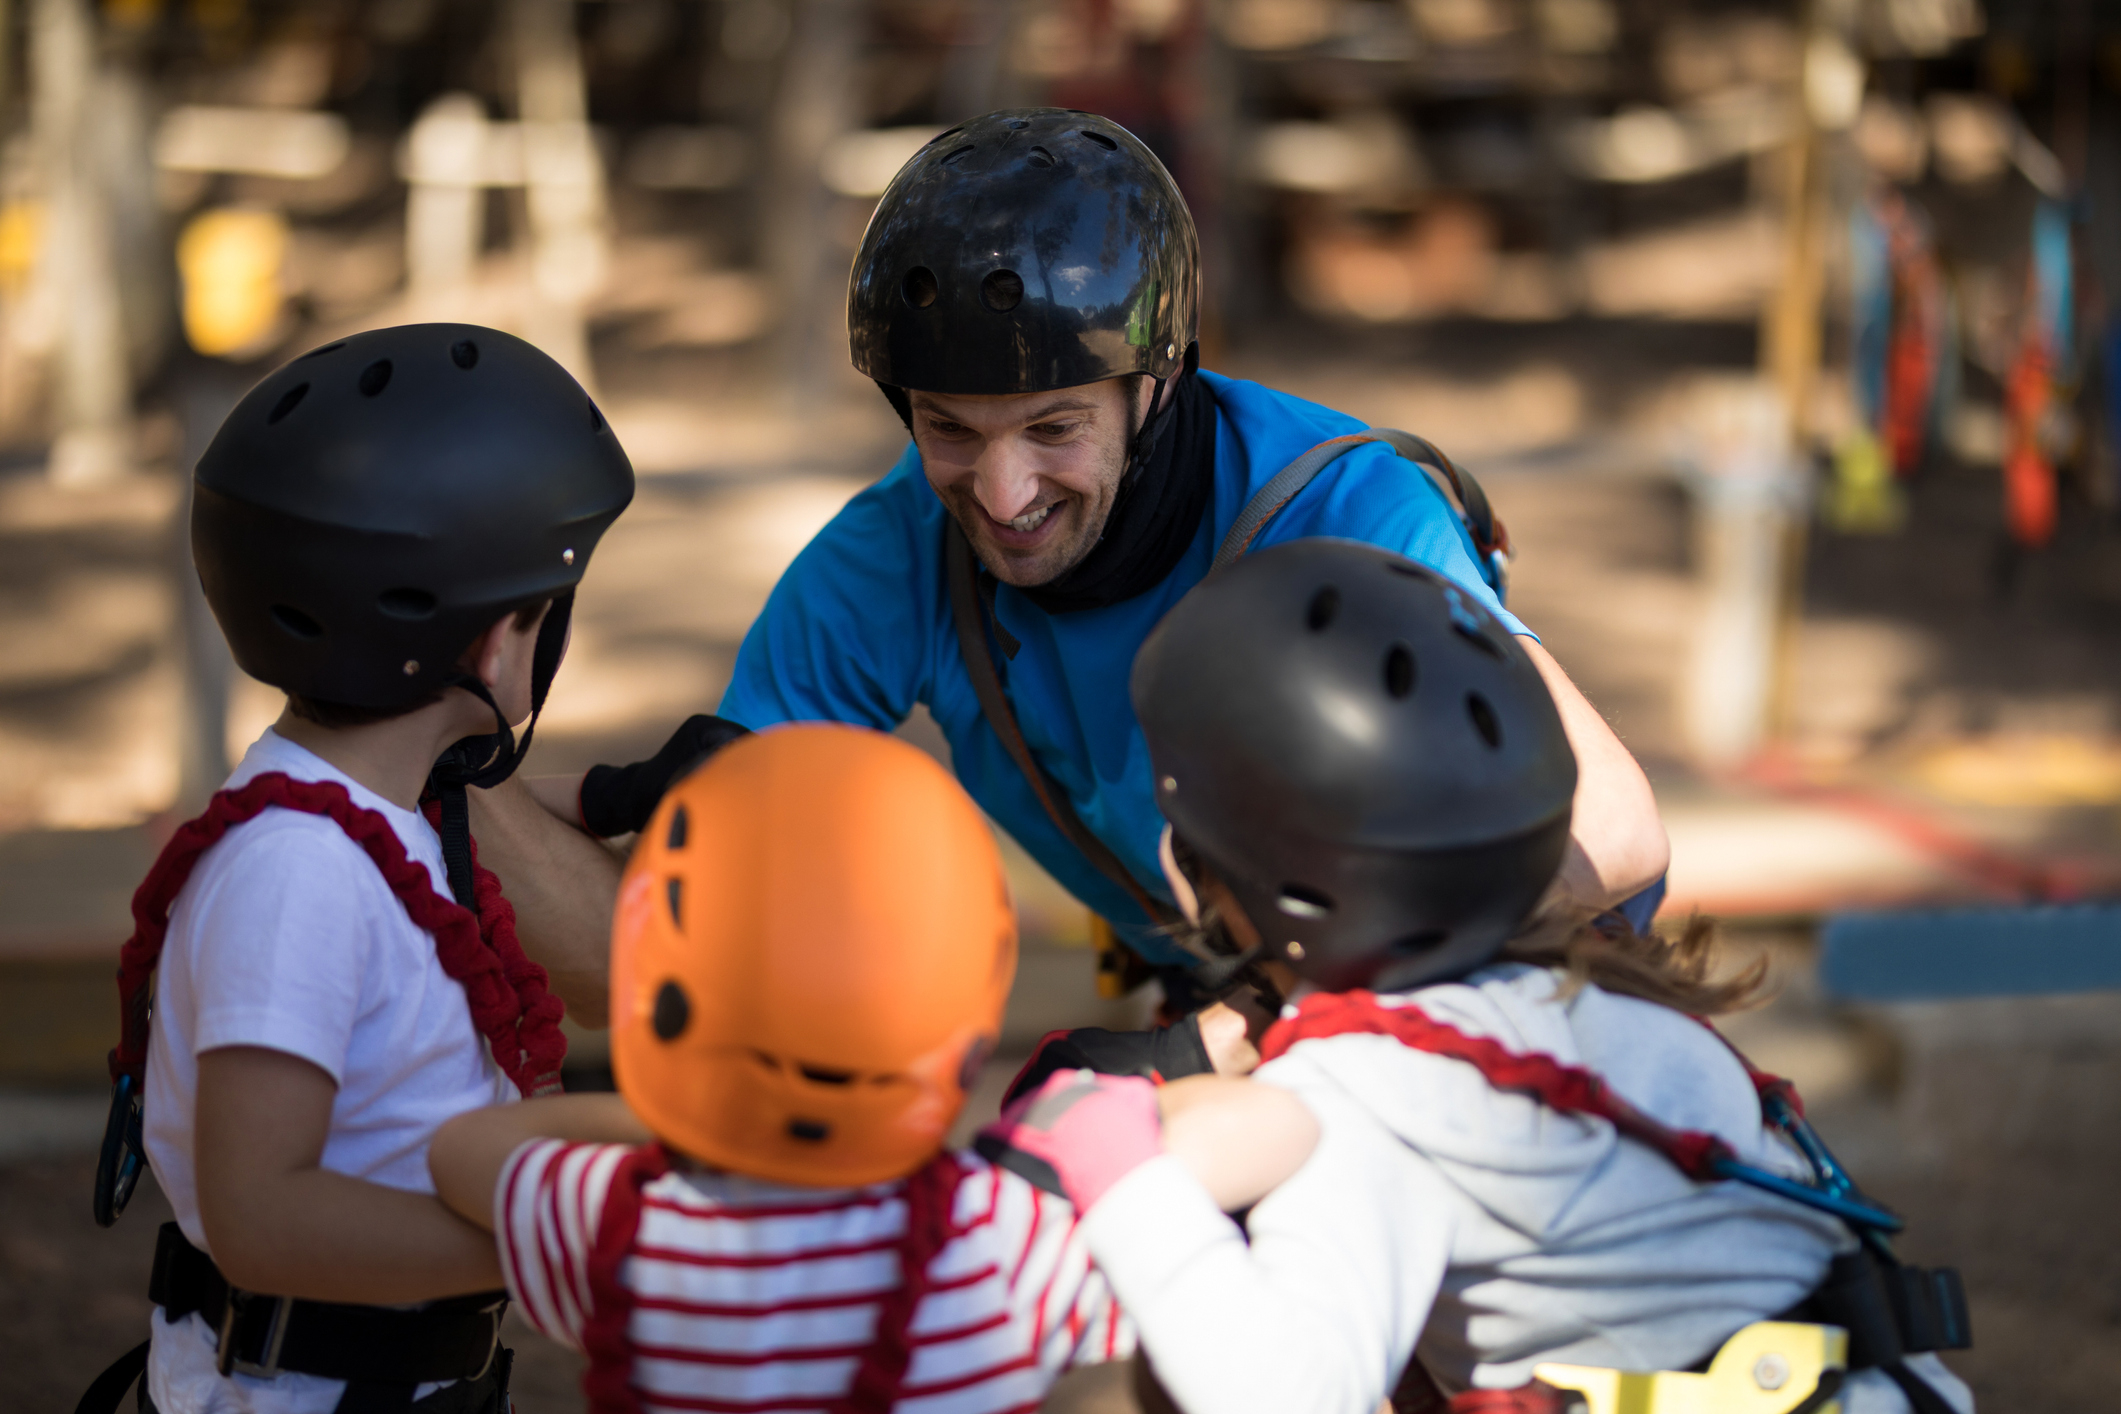 Instructor in a blue shirt secures harnesses on two children wearing helmets before a ropes course